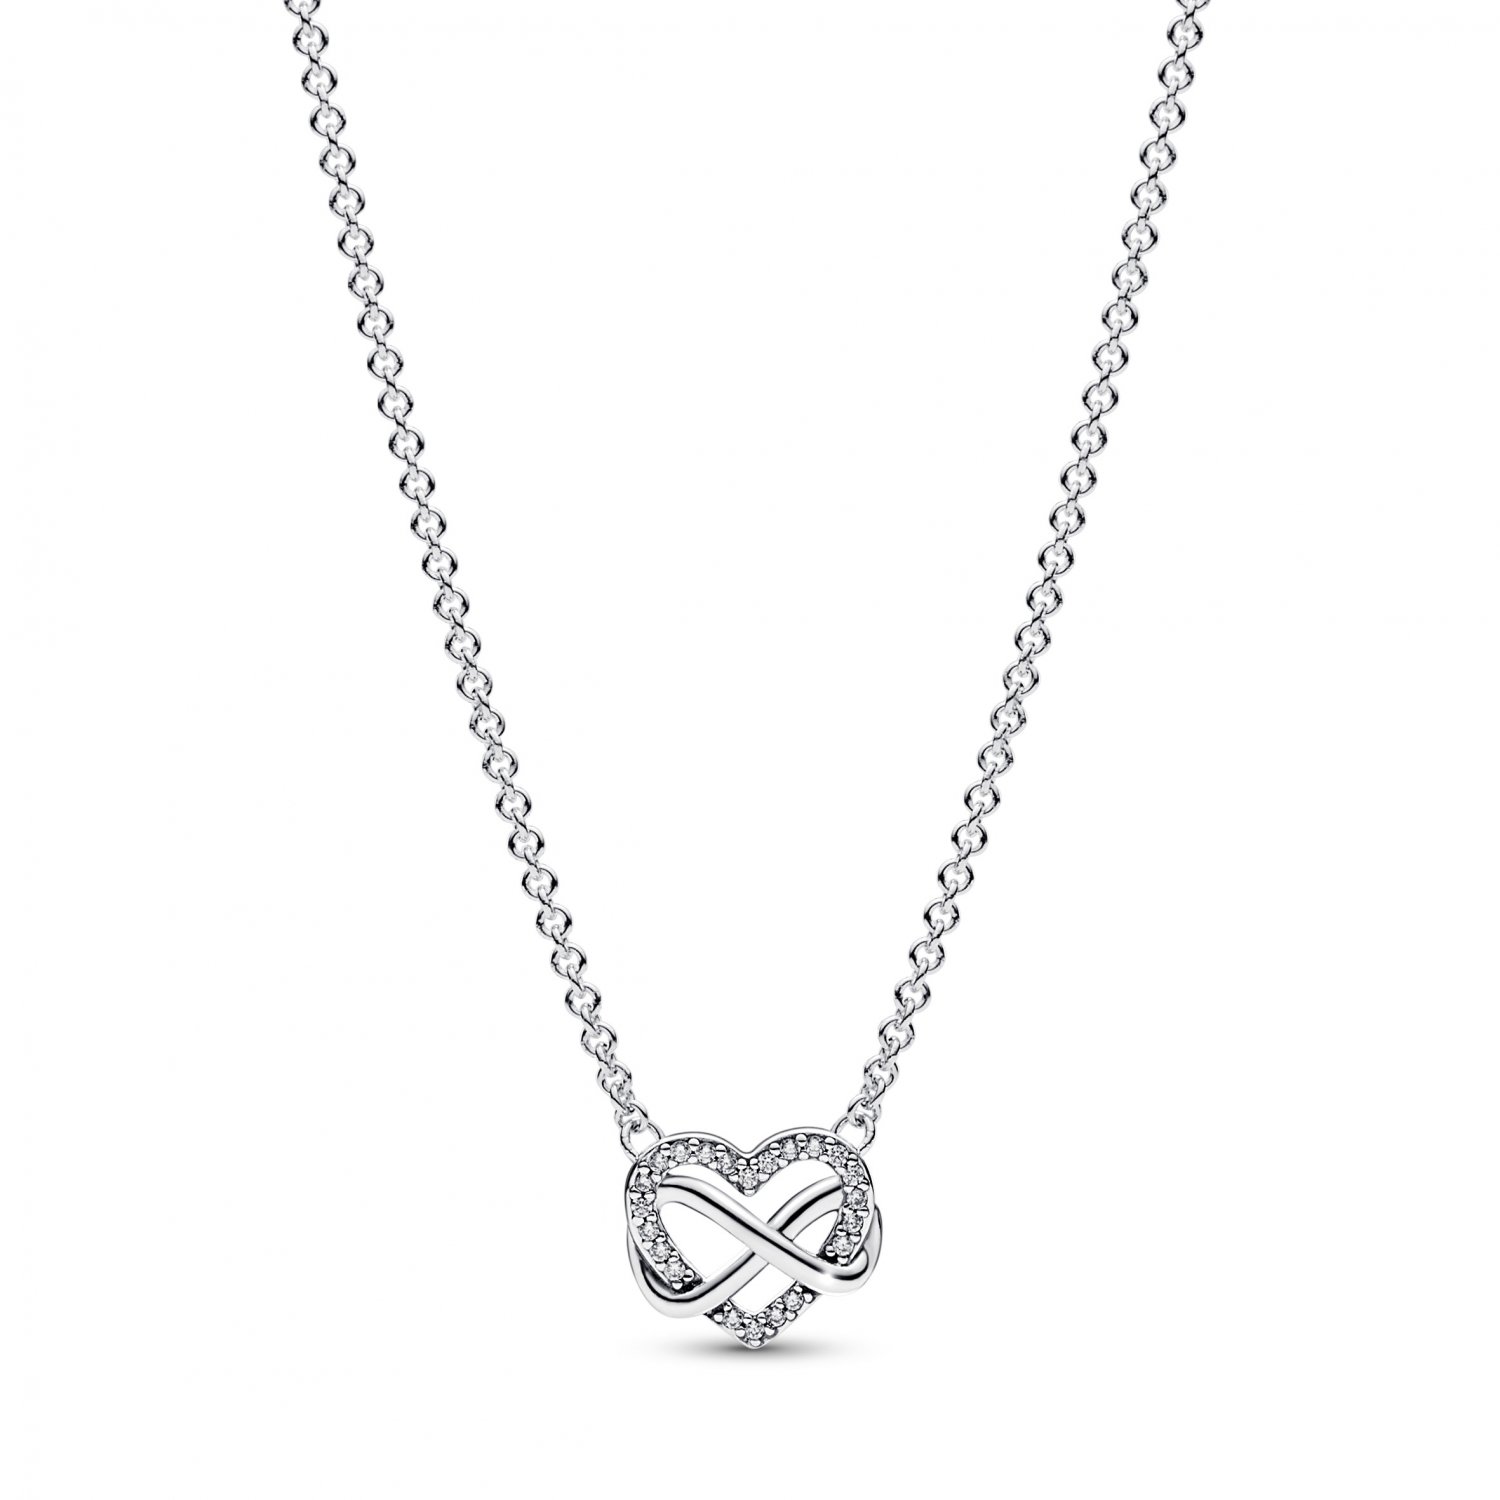 INFINITY HEART STERLING SILVER NECKLACE WITH CLEAR CUBIC ZIR